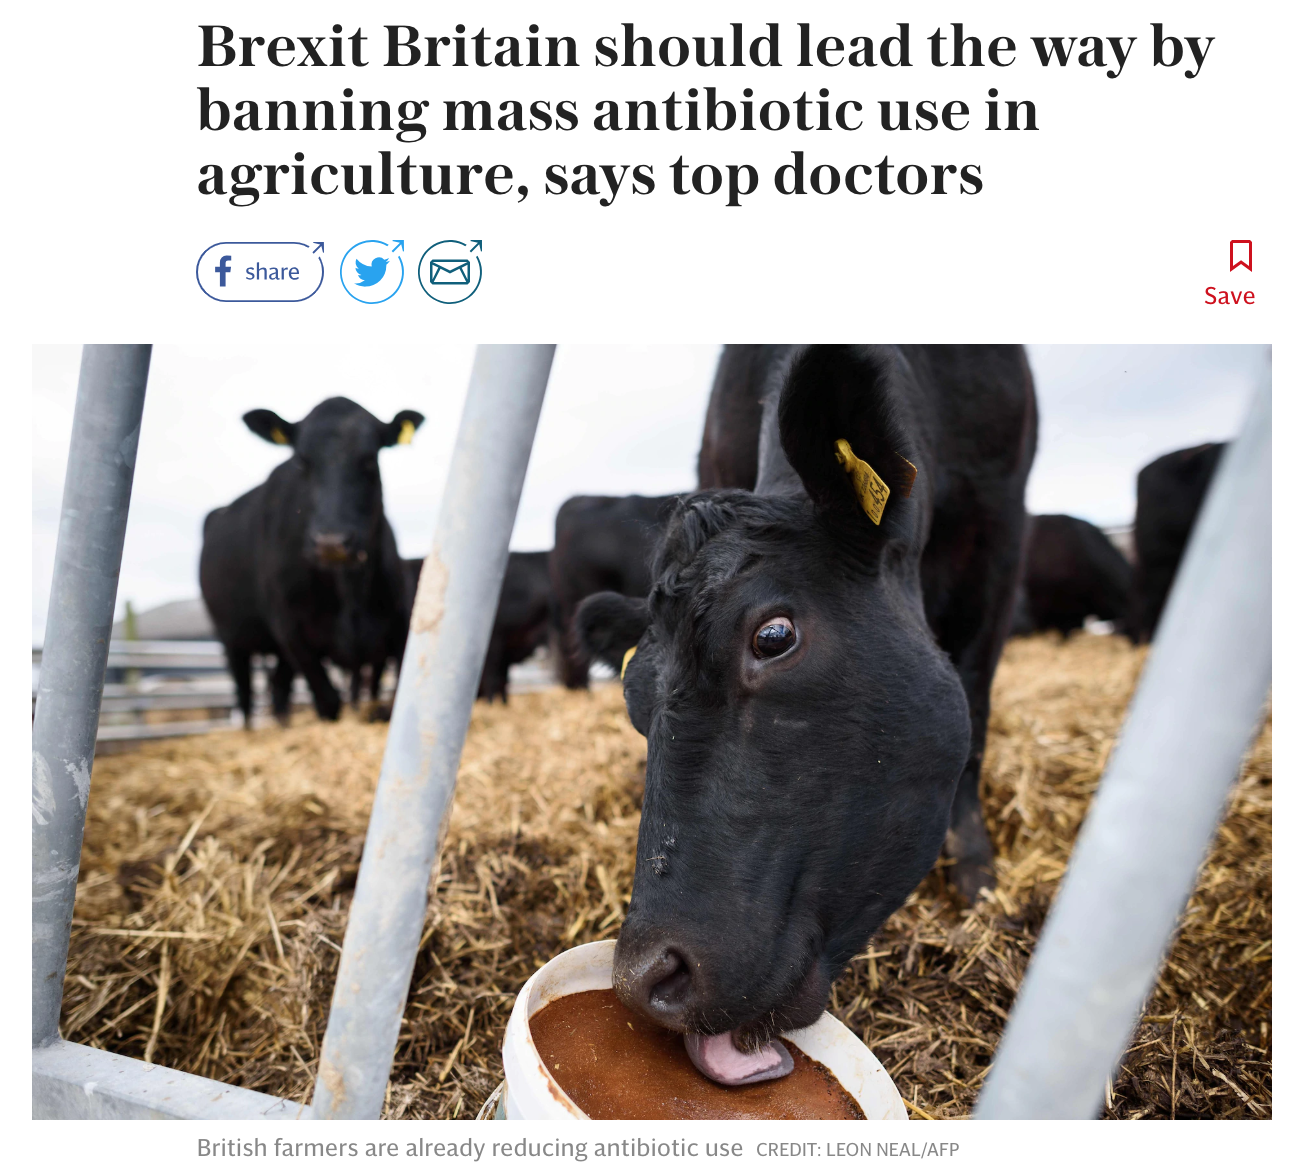 Brexit Britain should lead the way by banning mass antibiotic use in agriculture, says top doctors